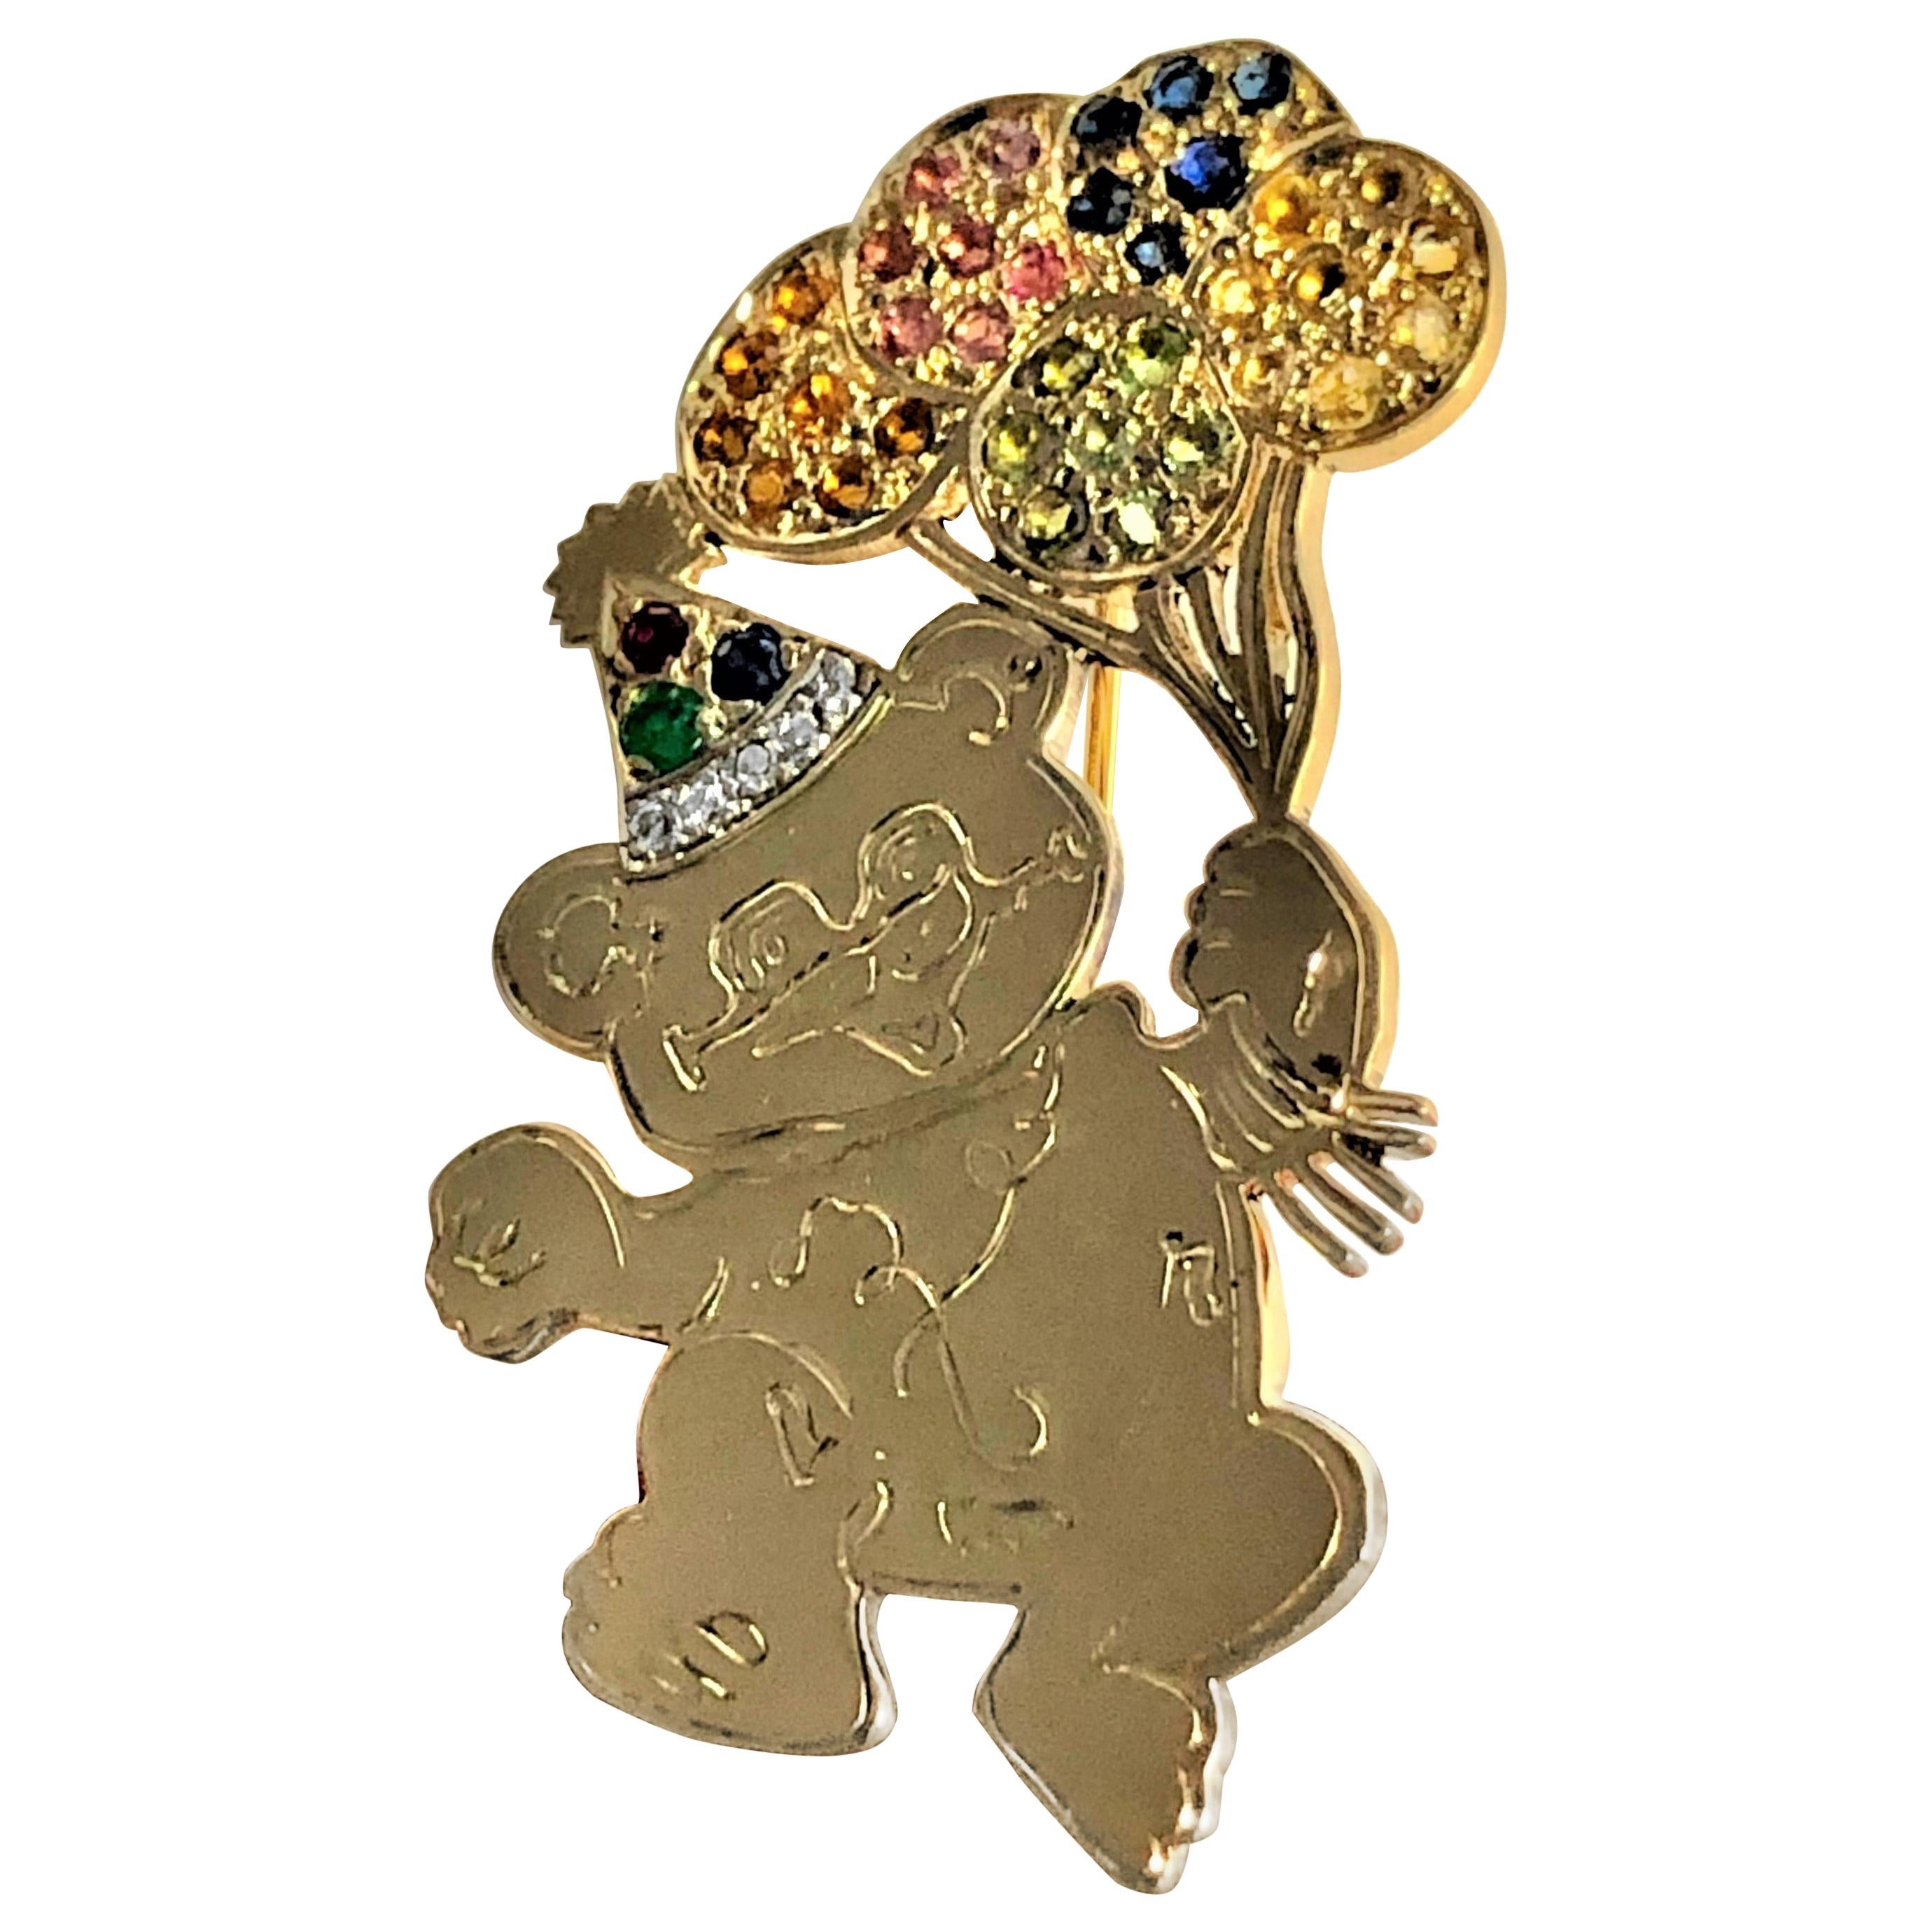 Birthday Bear Brooch in 14k Yellow Gold with Diamonds and Colored Stones